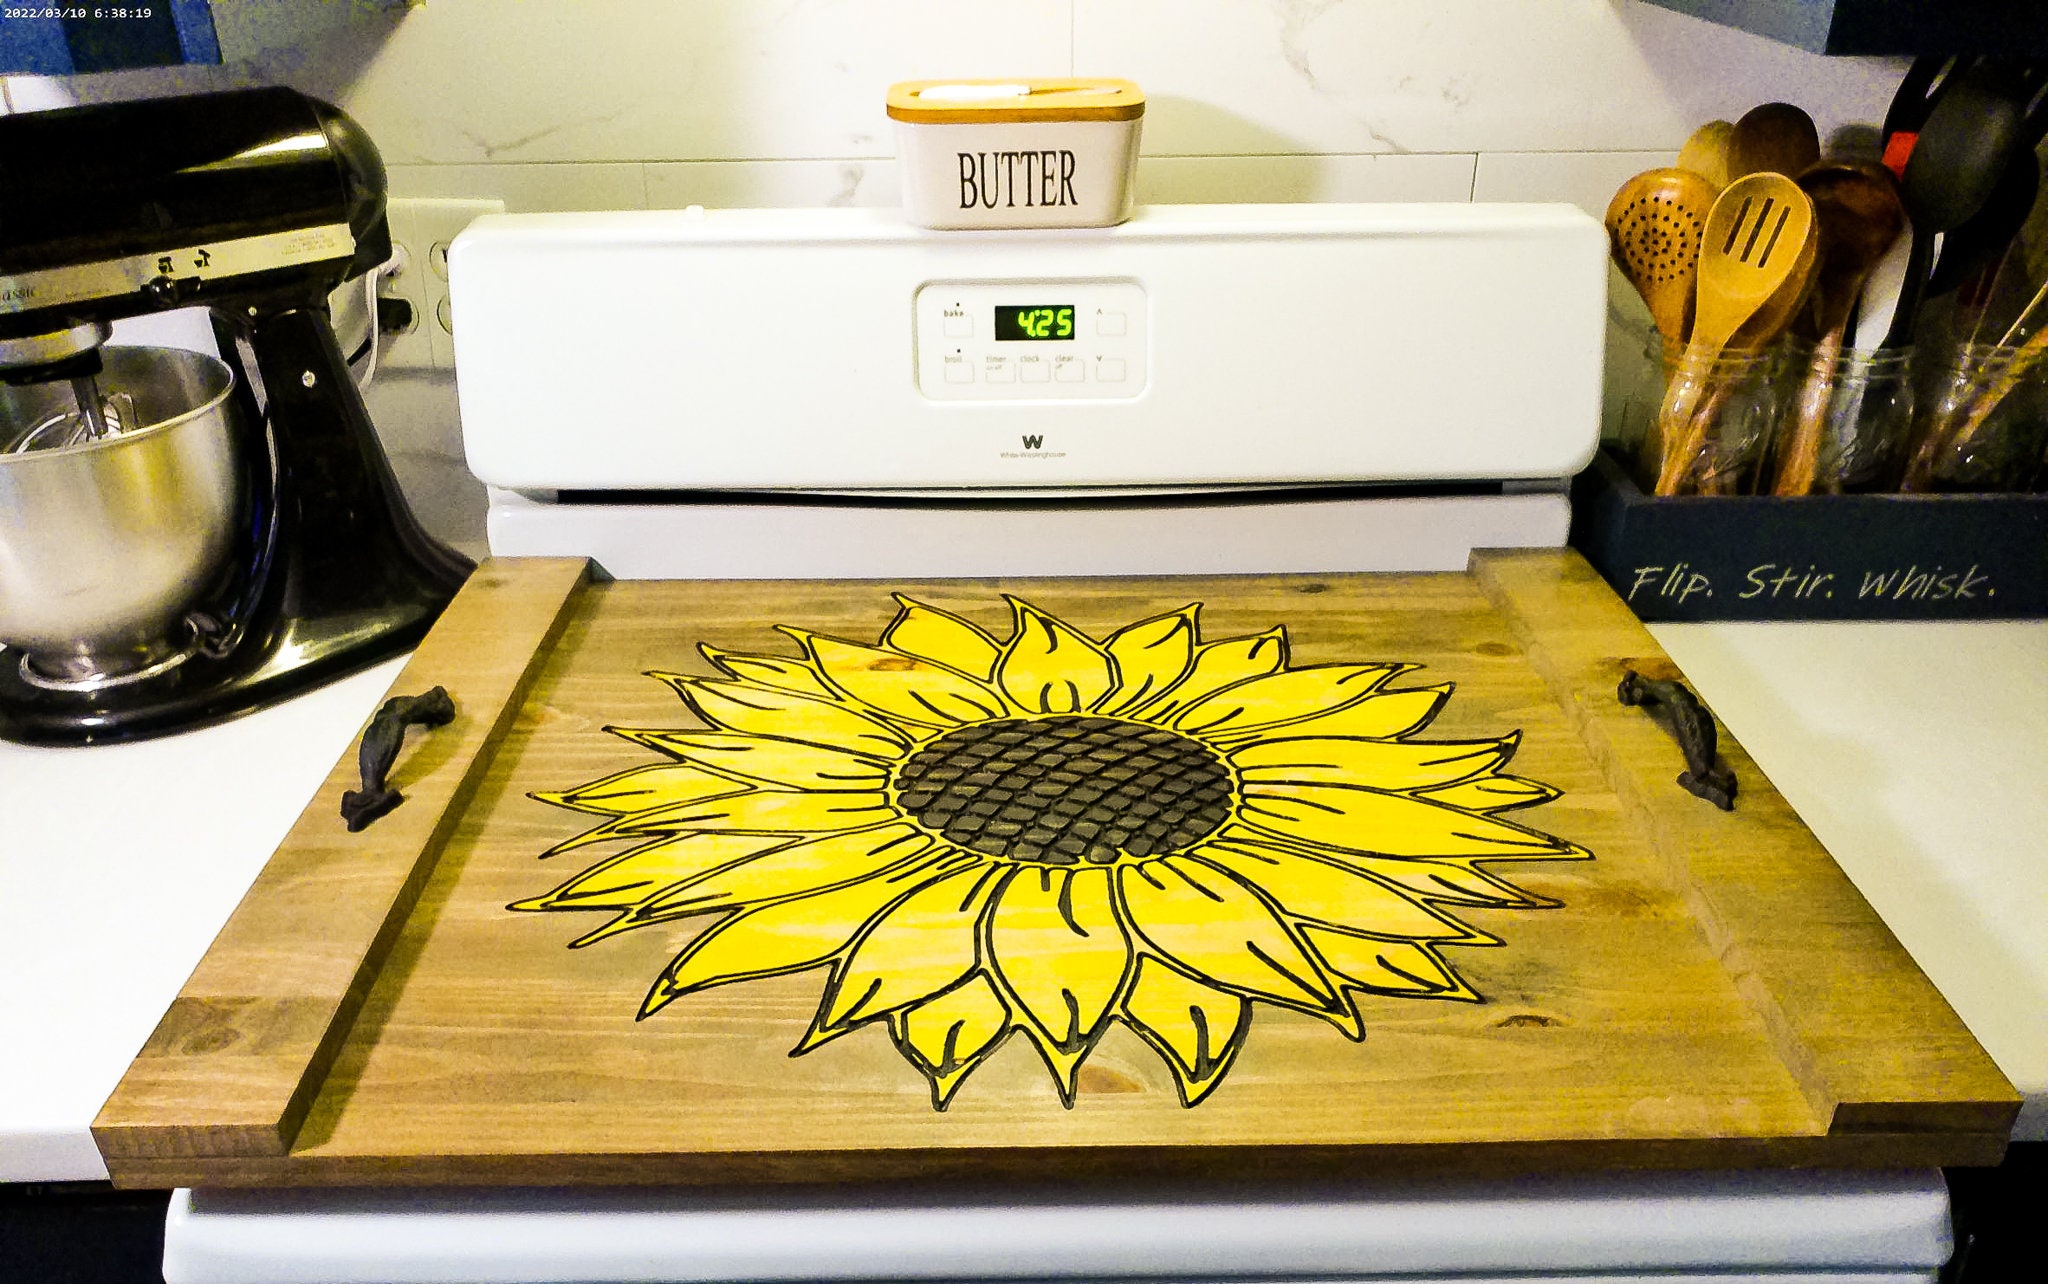 KITCHEN BOARD & Induction Cooktop Cover Sunflower 2 